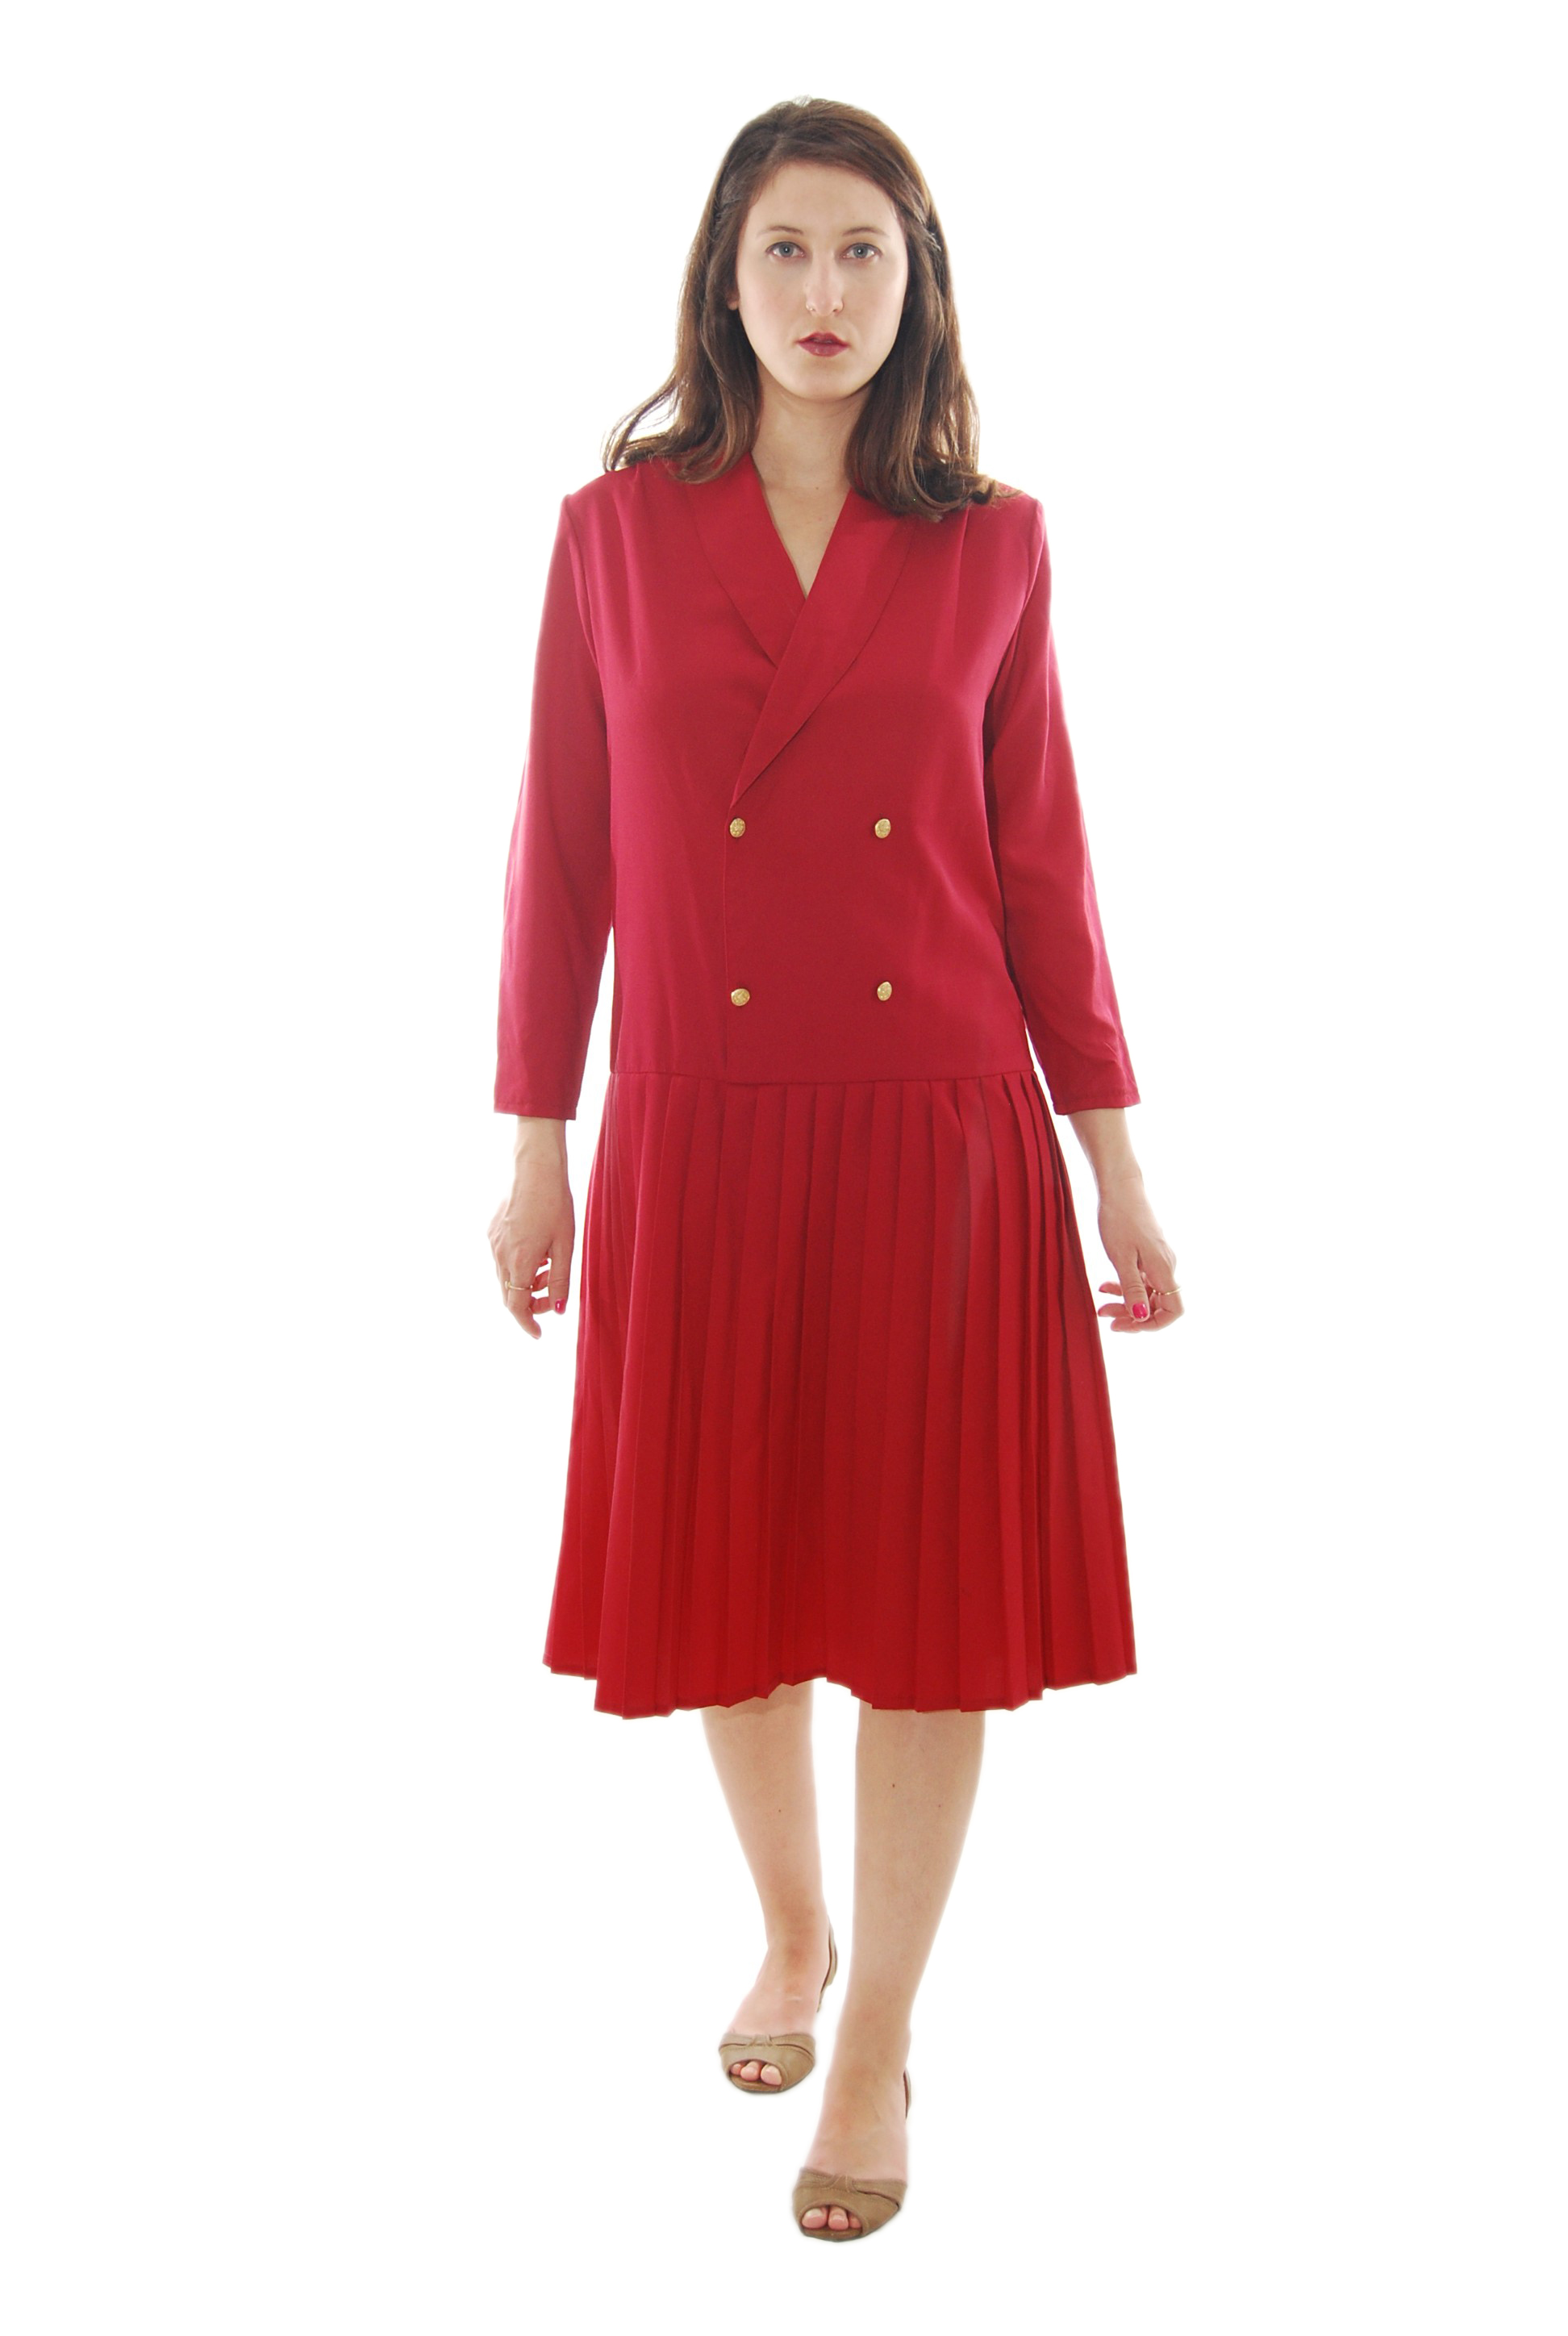 Women clothing what red 32